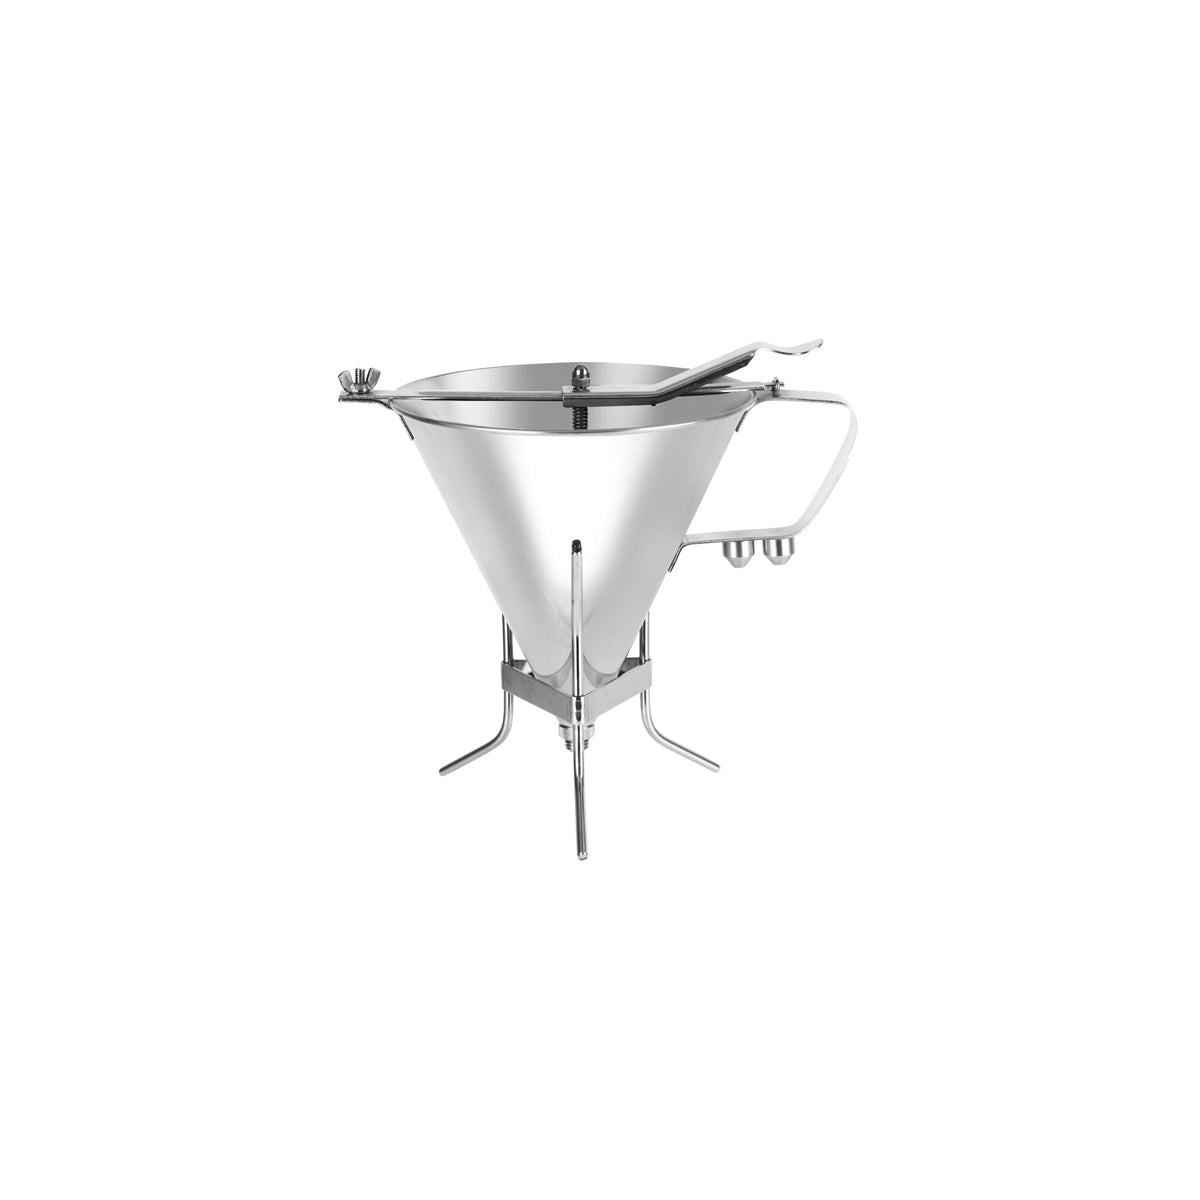 37180 De Buyer Funnel Confectionary with Stand 1.9Lt Tomkin Australia Hospitality Supplies